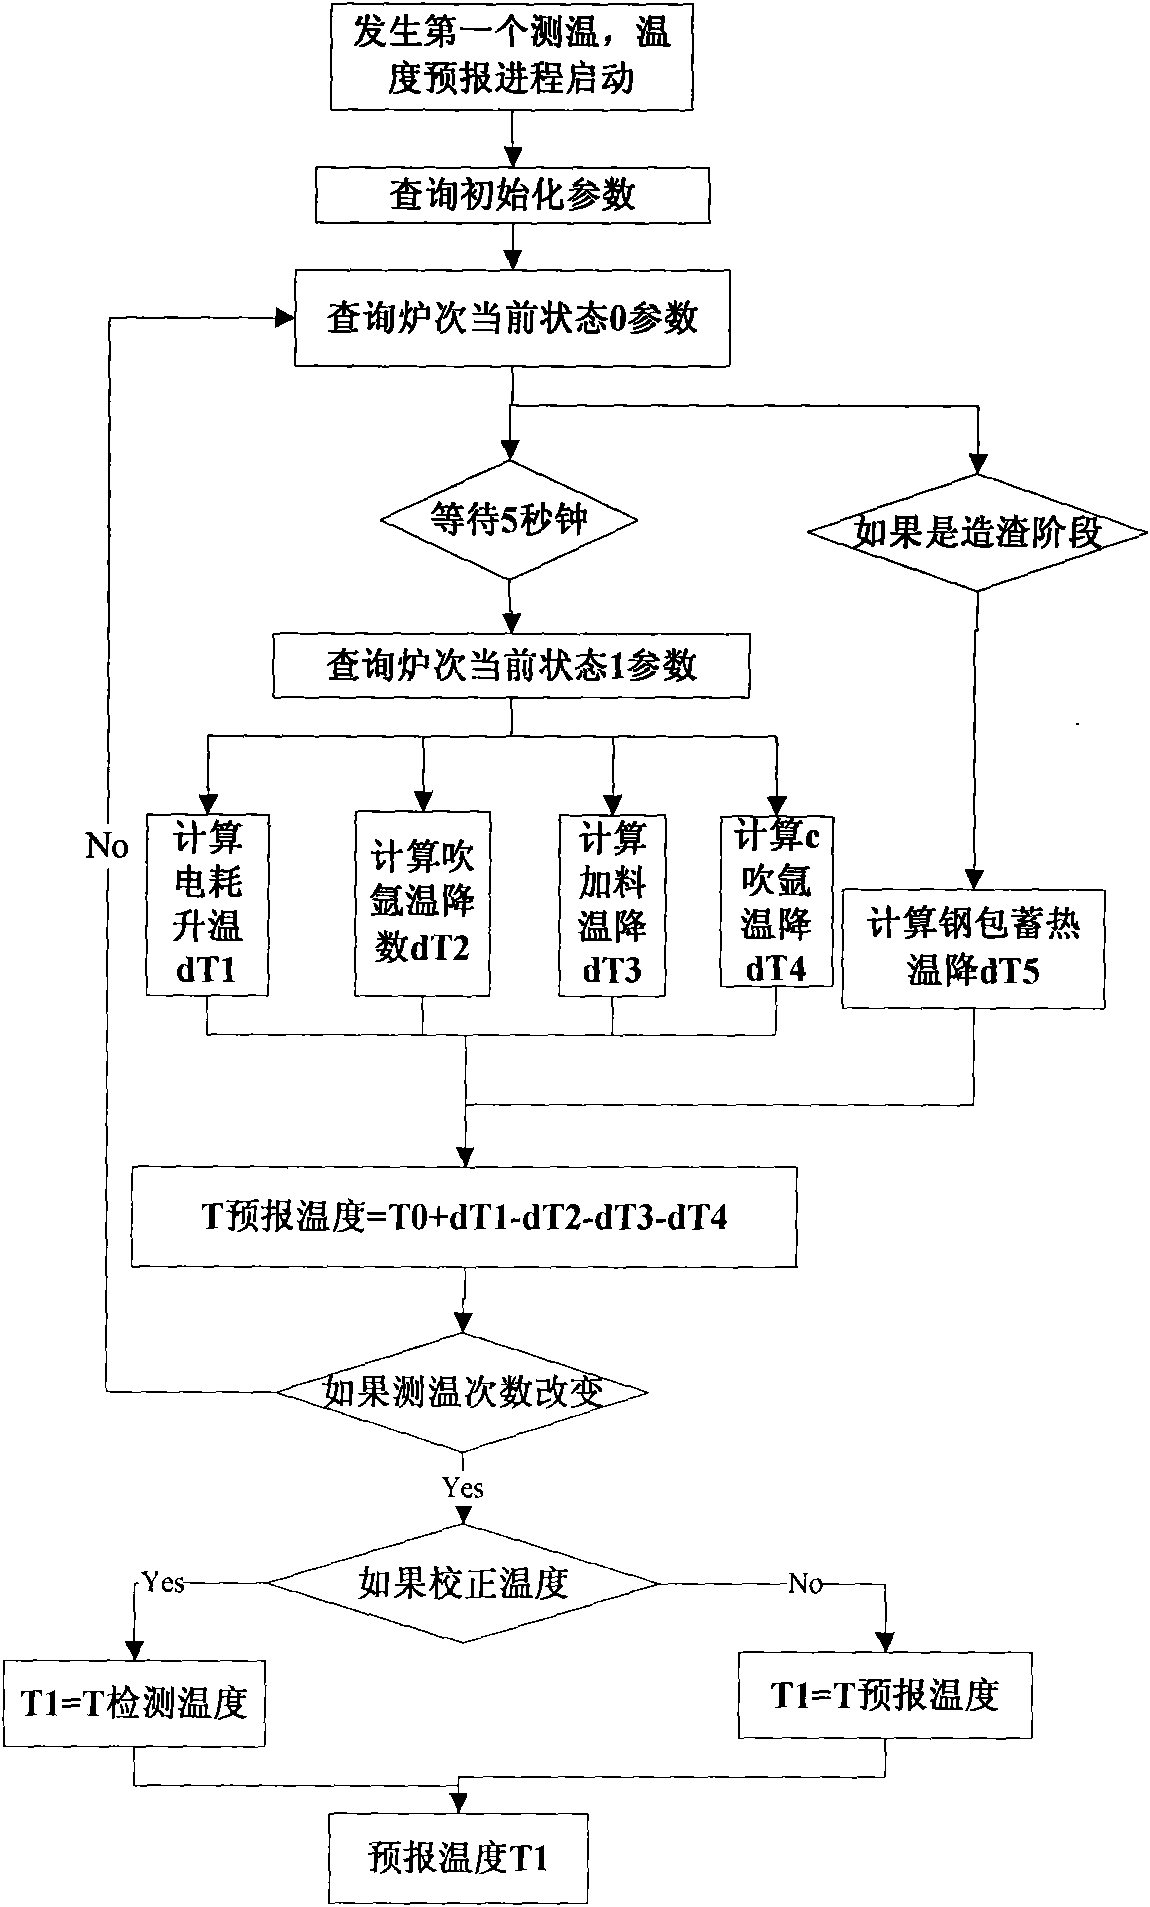 System for controlling forecast of molten steel temperature of double-station LF furnace